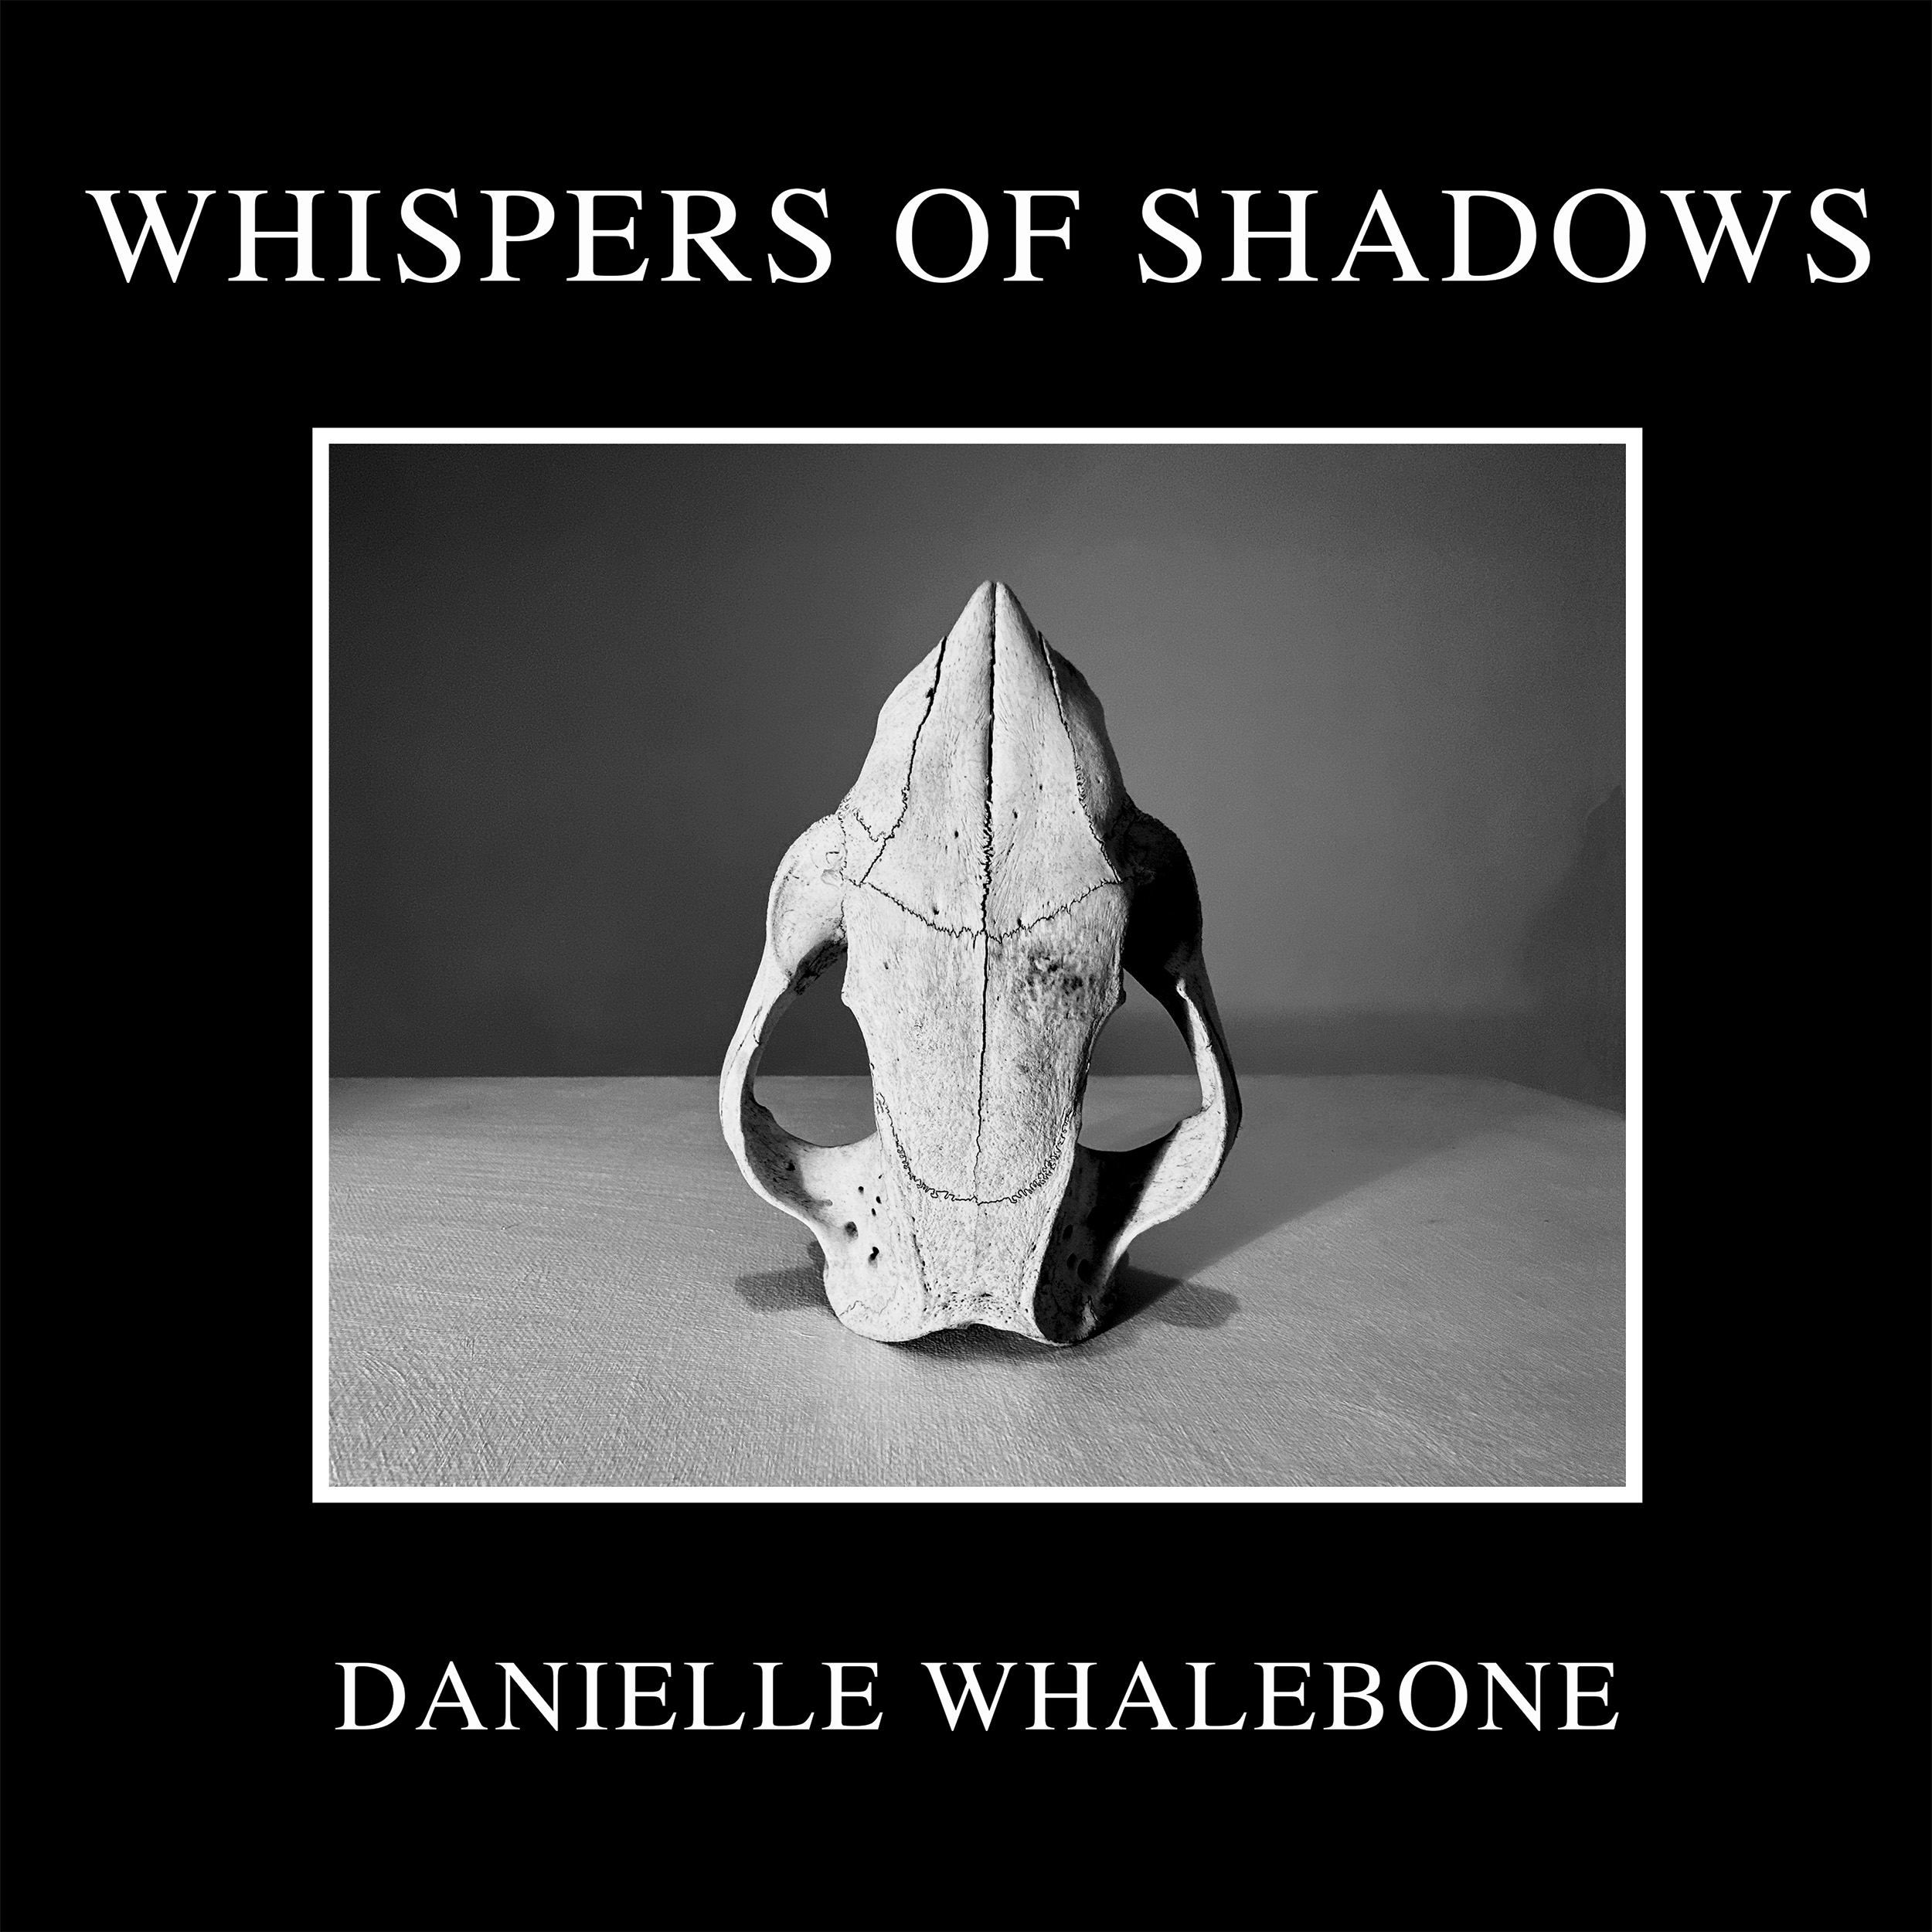 Danielle Whalebone Unveils “Whispers of Shadows” – A Poetic Journey